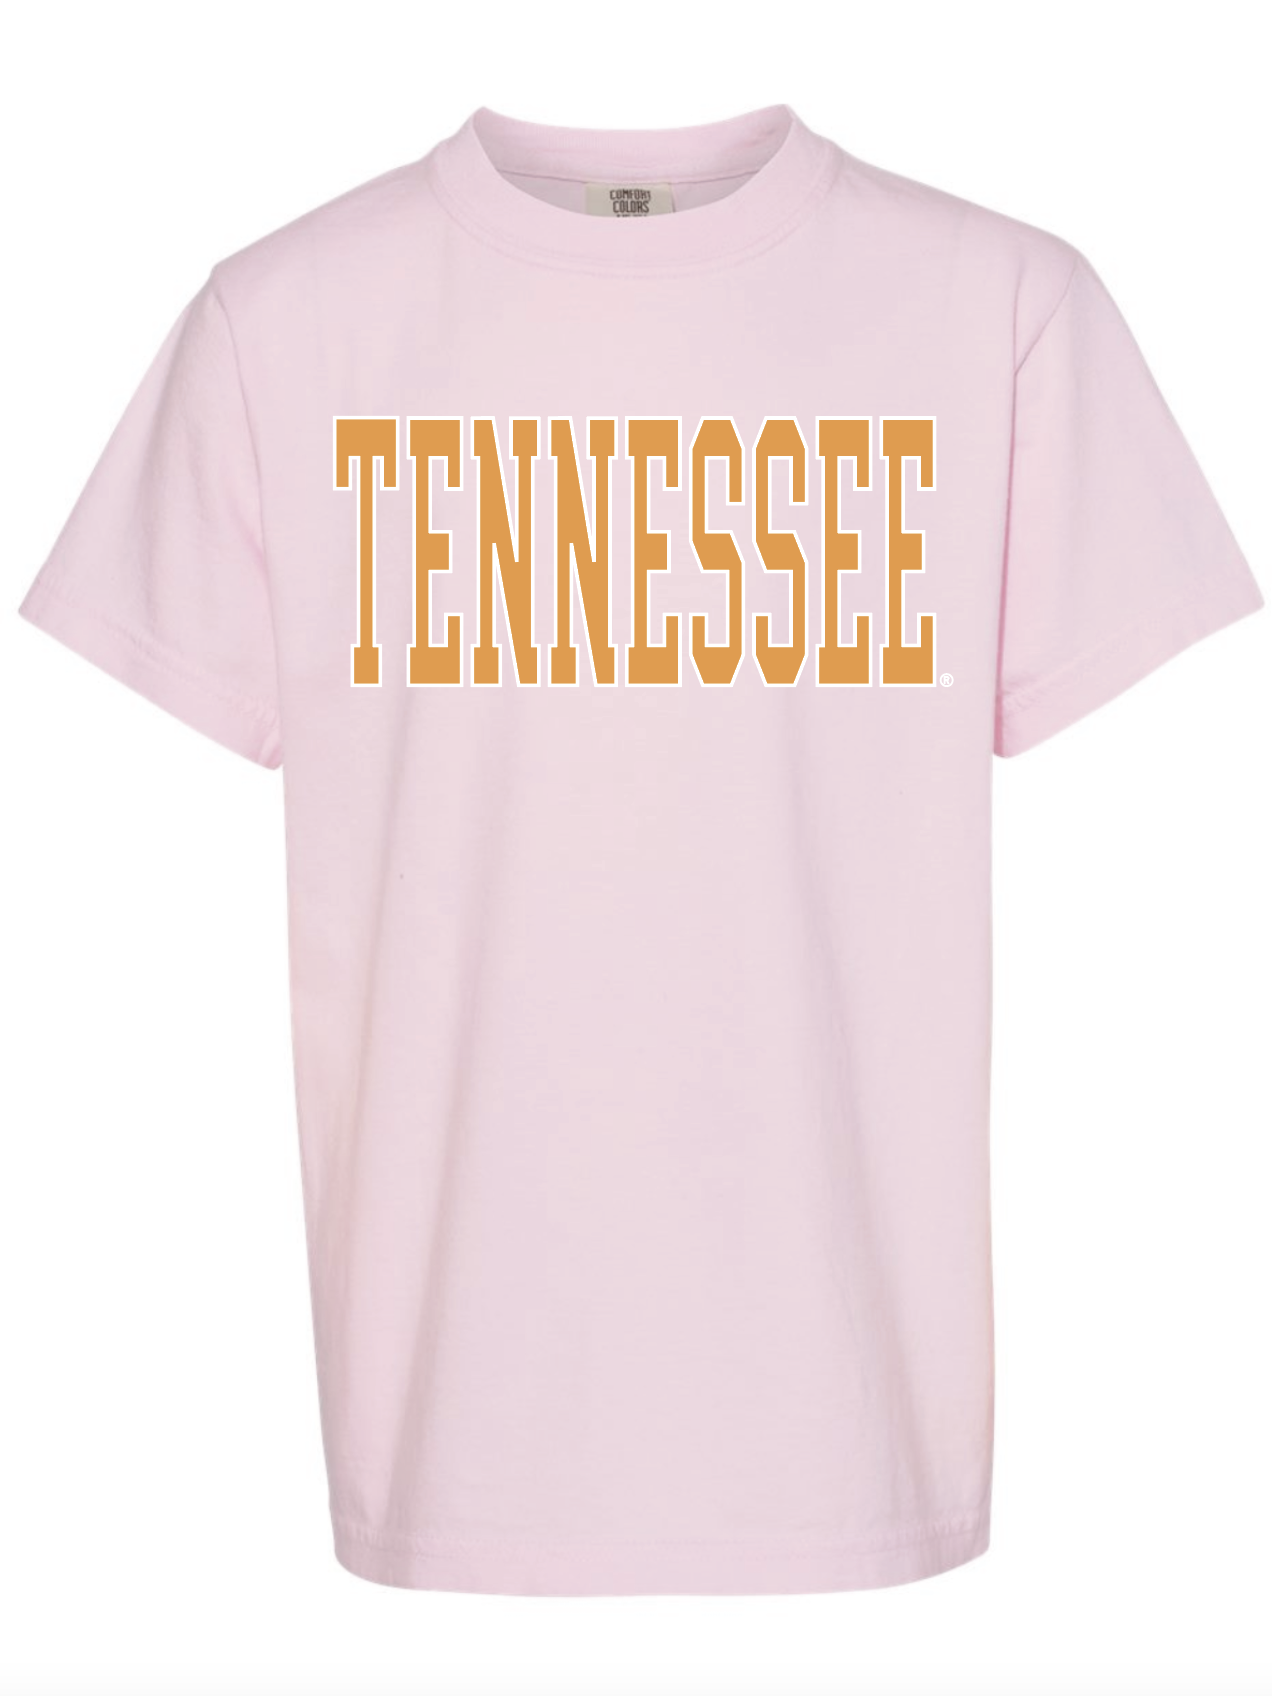 Kids Pink with Orange "Tennessee" T-Shirt